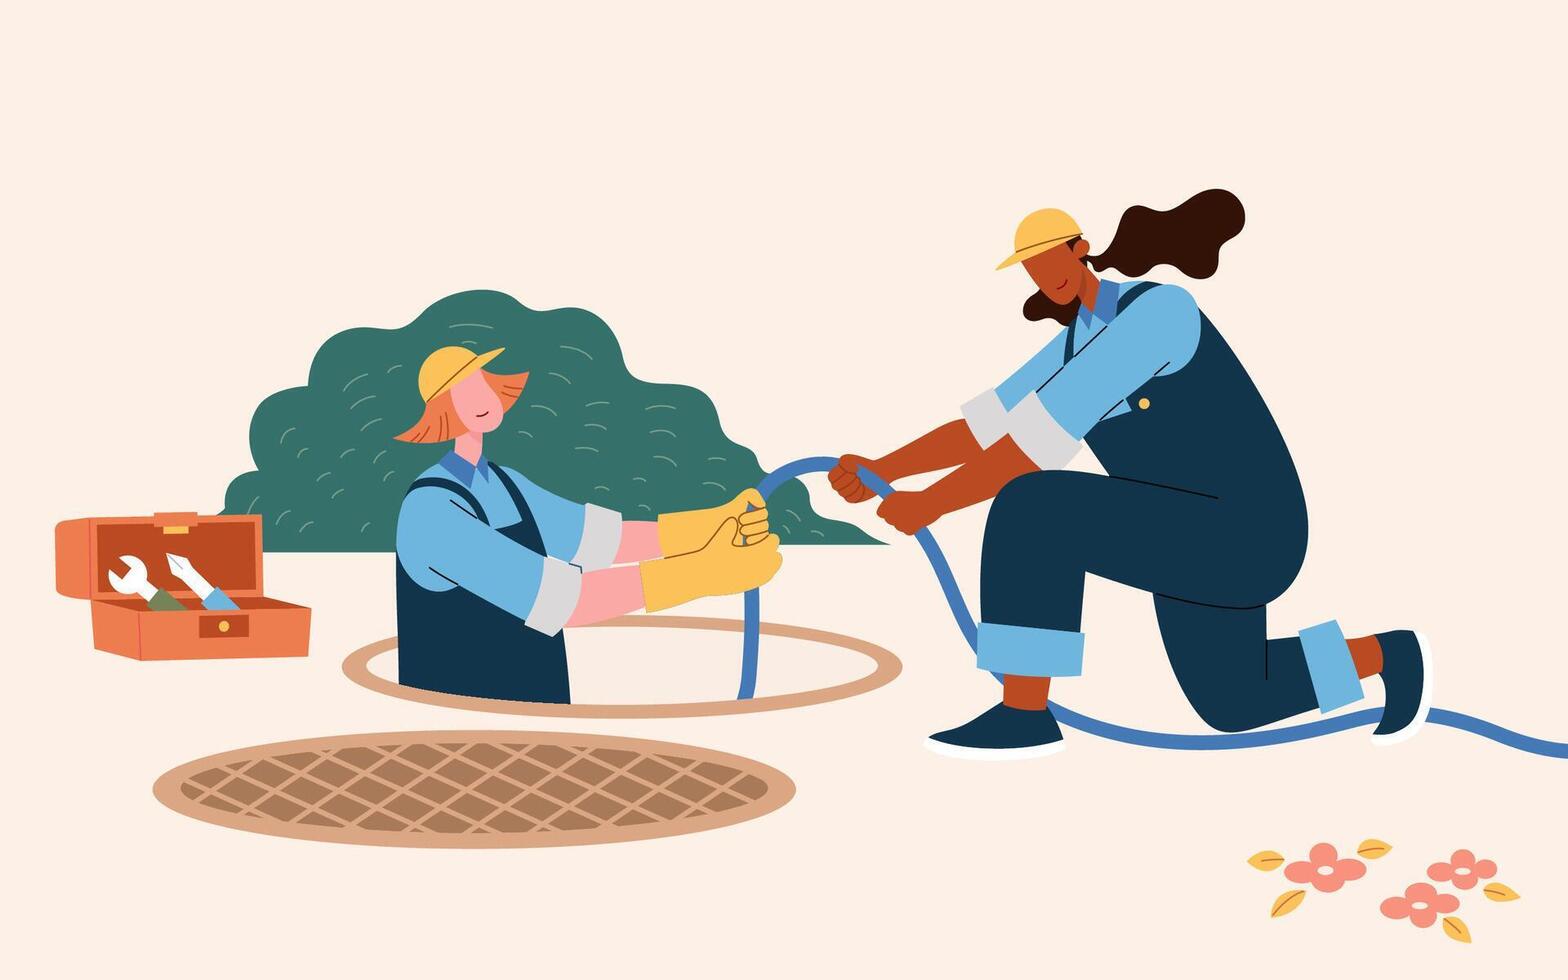 Female working in manhole plumbing. Flat style illustration of two girl worker goes underground on the manhole for sewer repair. Concept of women at work vector